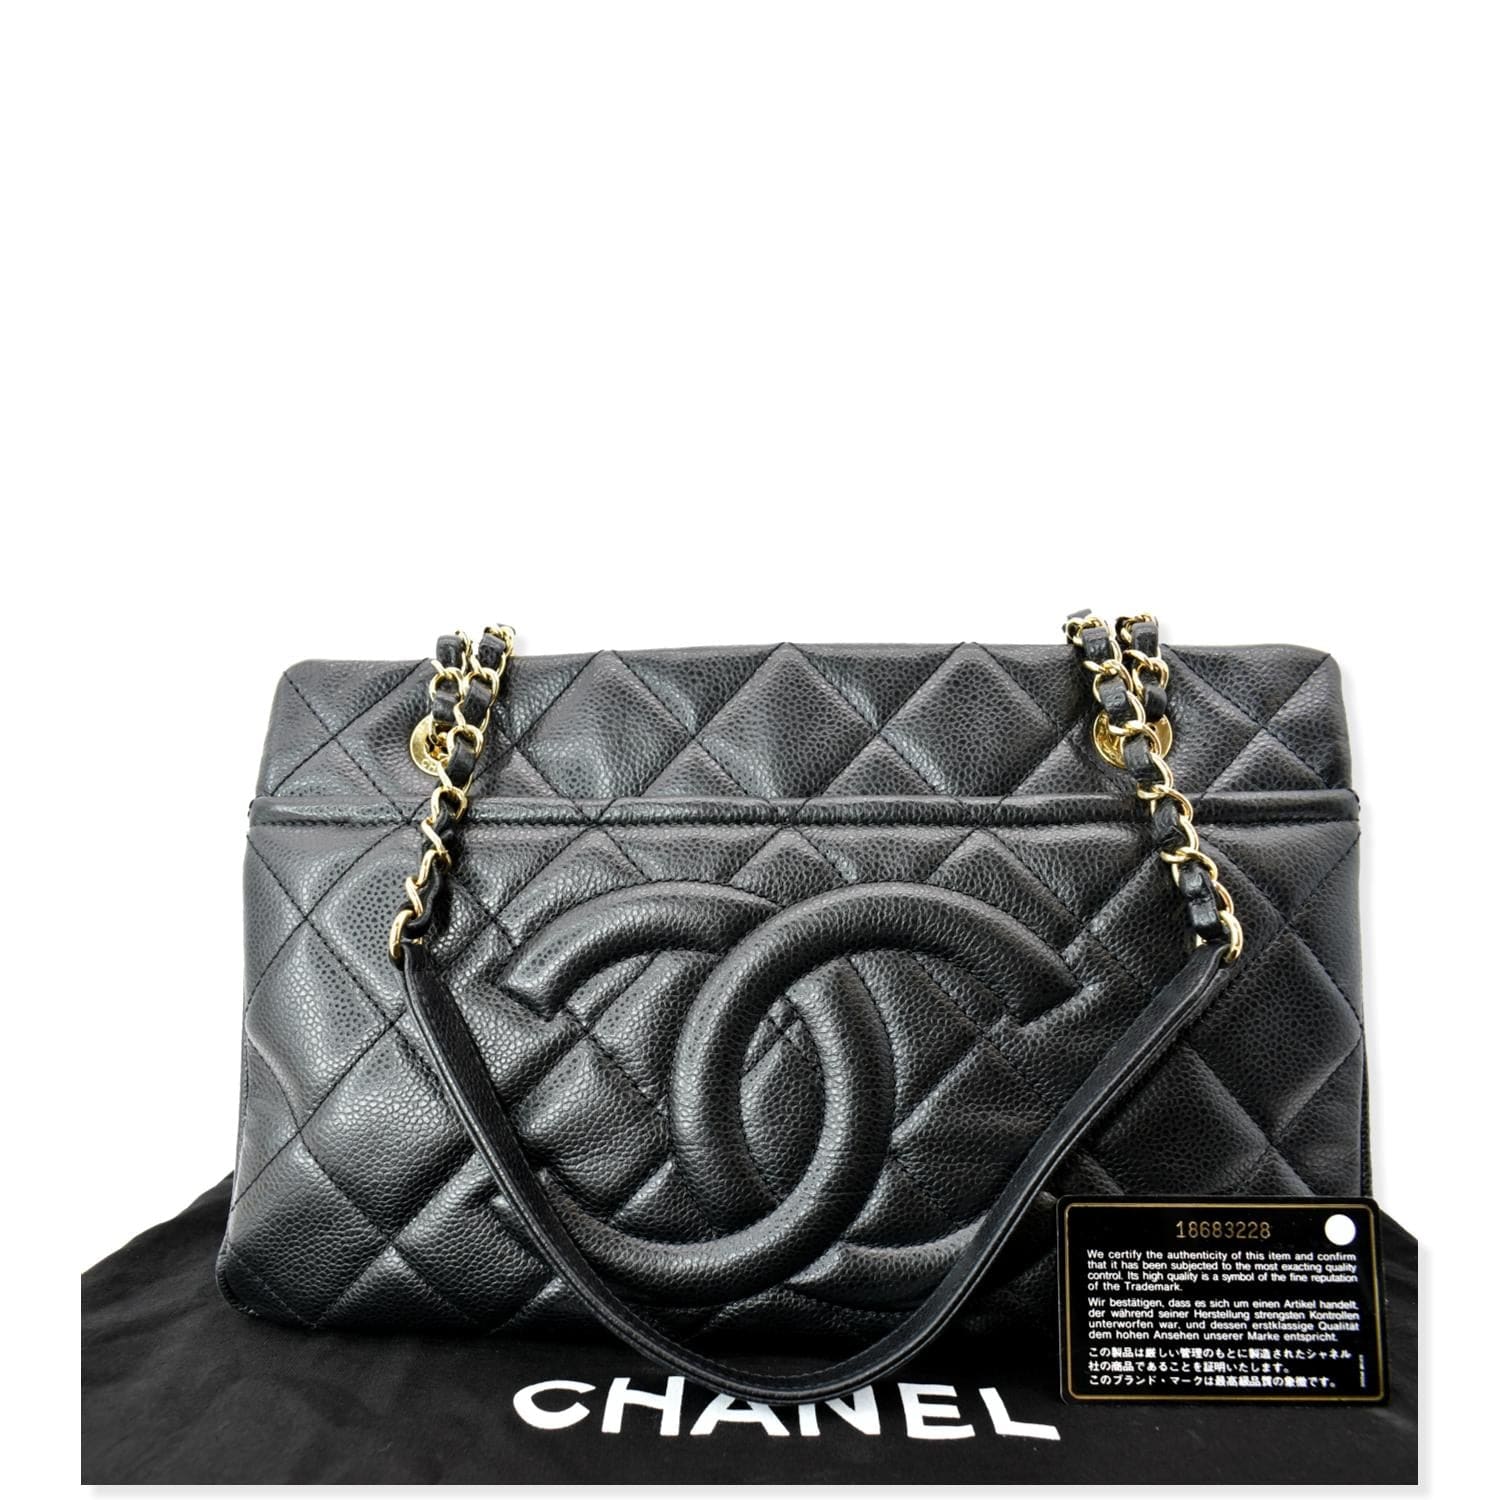 Chanel 2020 Large Quilted 31 Shopping Tote w/ Authenticity Card